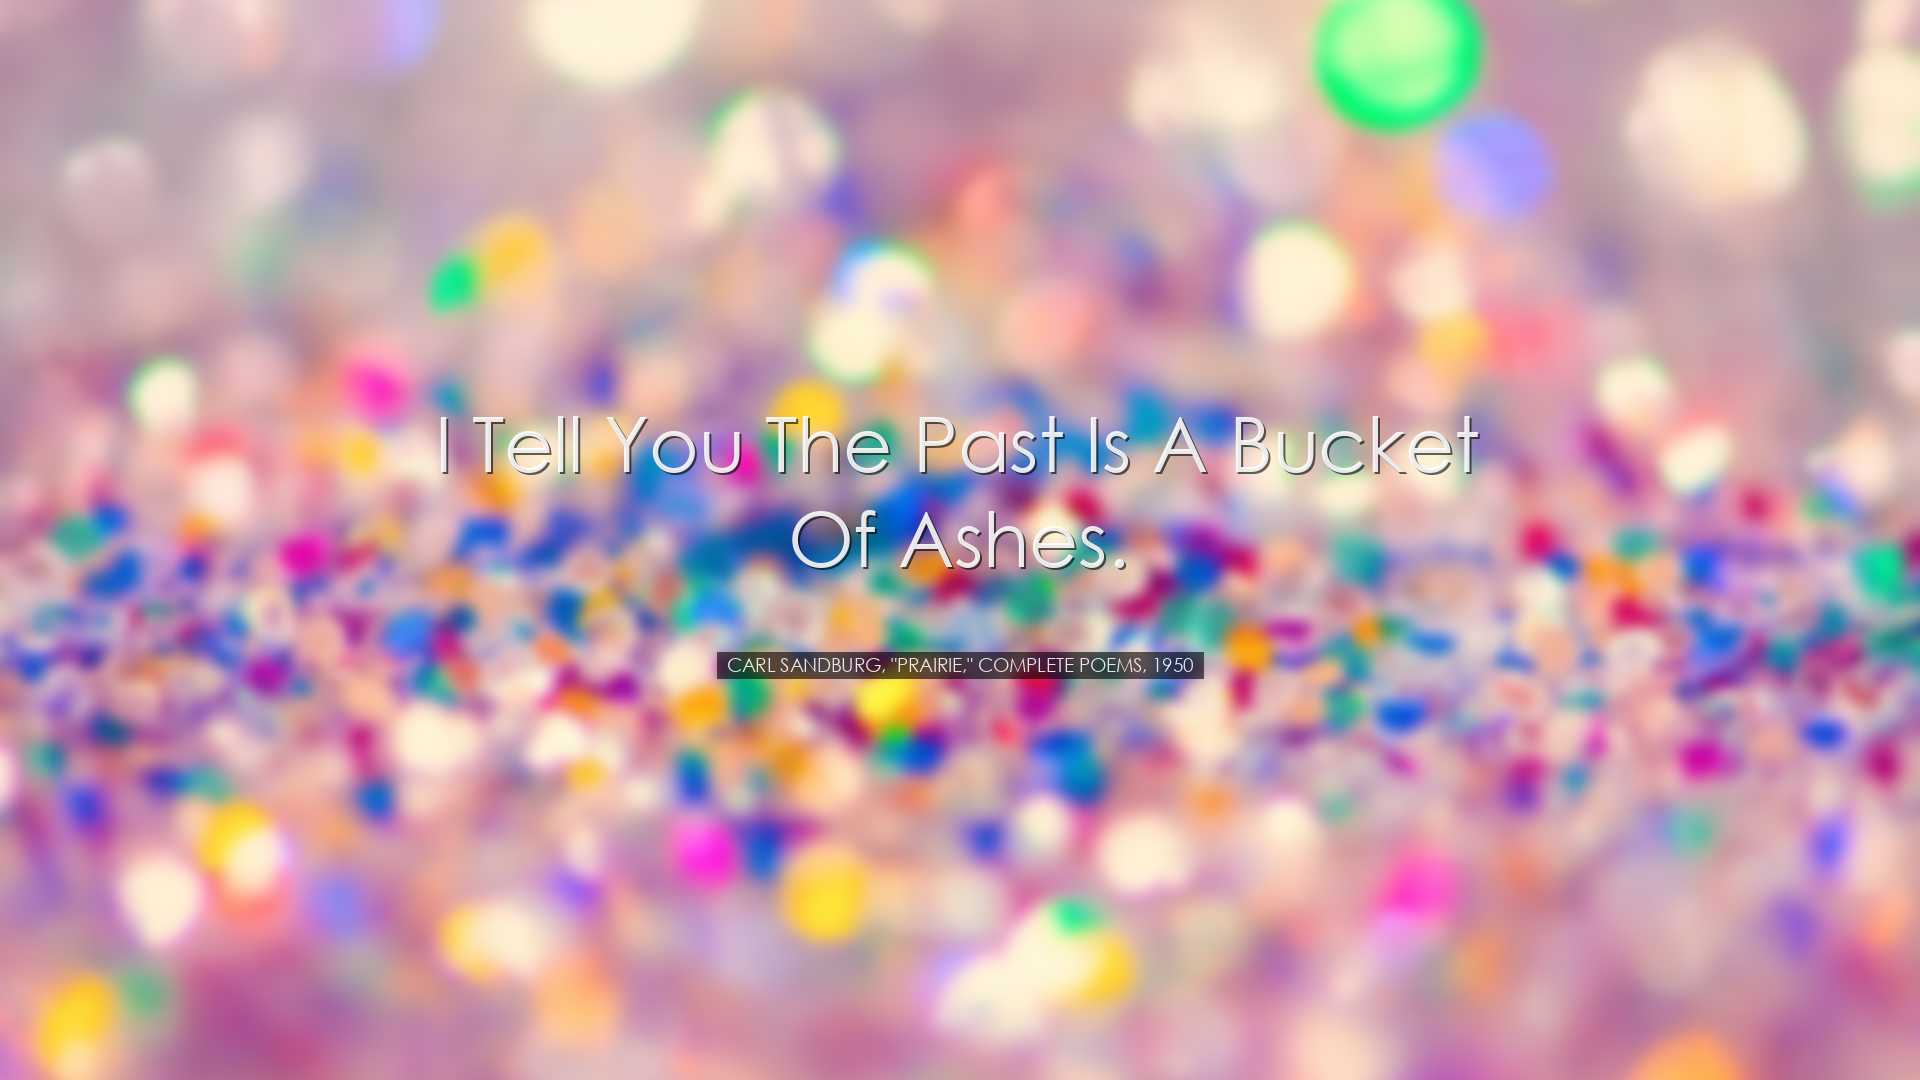 I tell you the past is a bucket of ashes. - Carl Sandburg, 